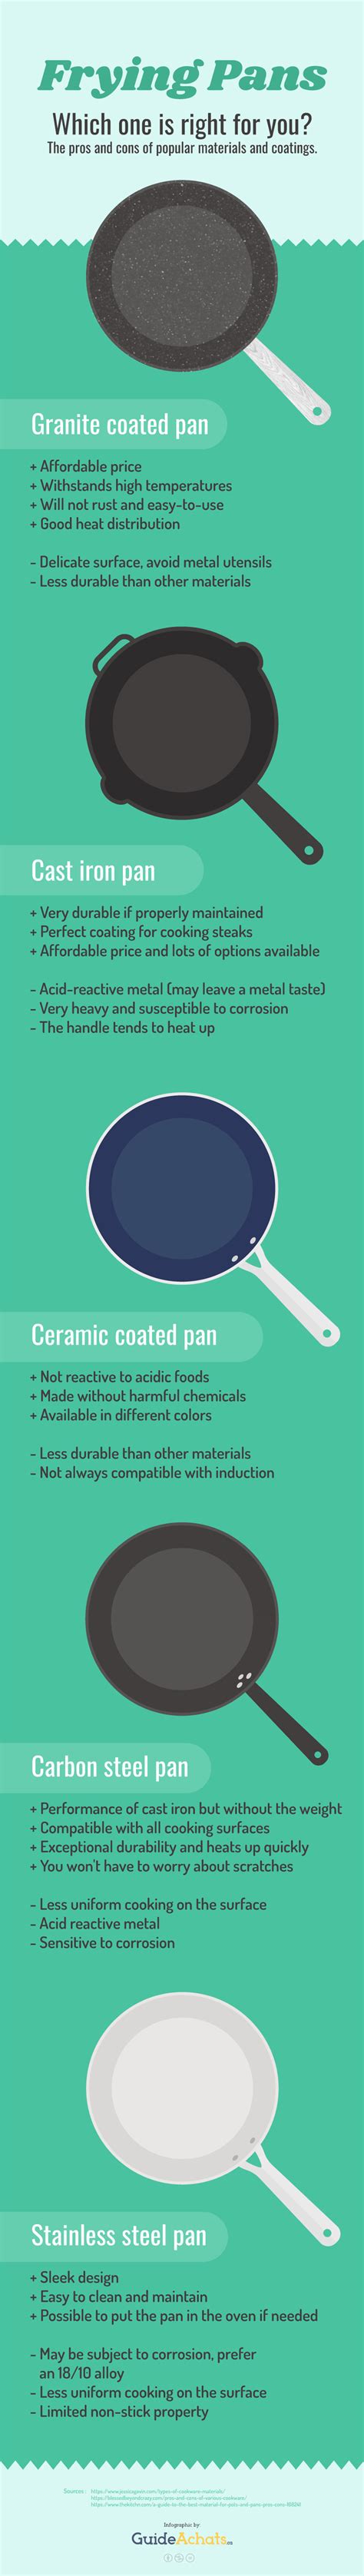 Frying Pans: Which One is Right For You? (Infographic)